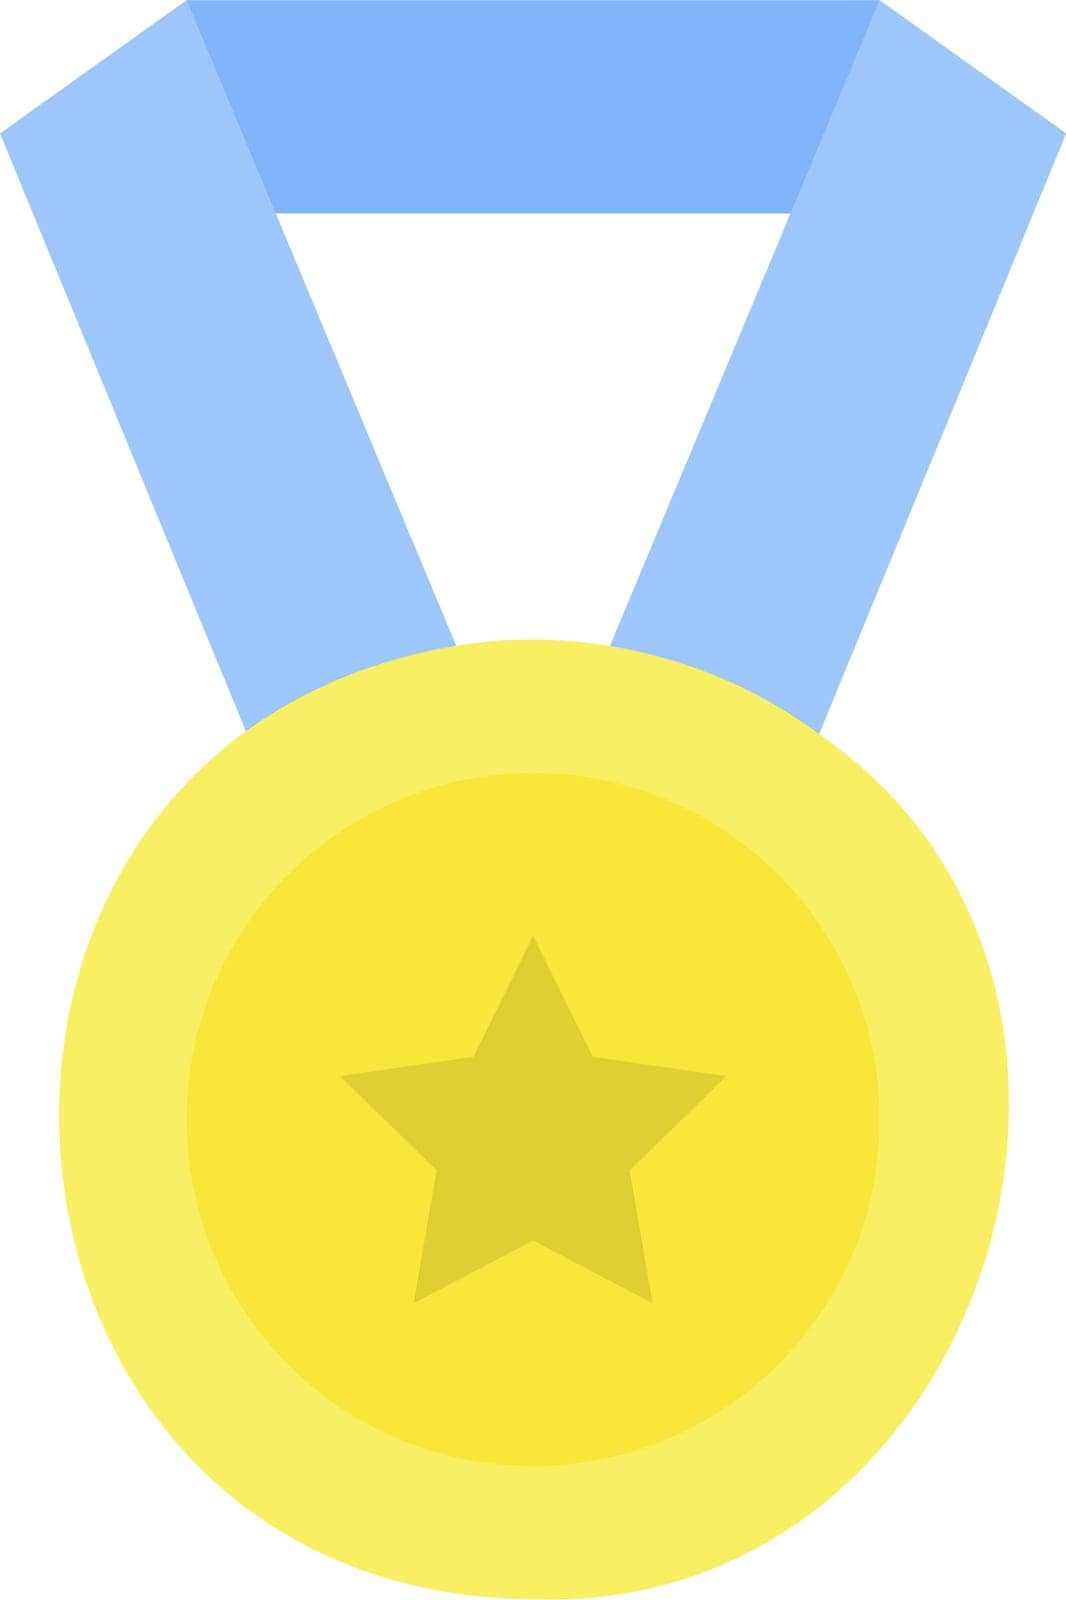 Medal Award Icon Image. by ICONBUNNY